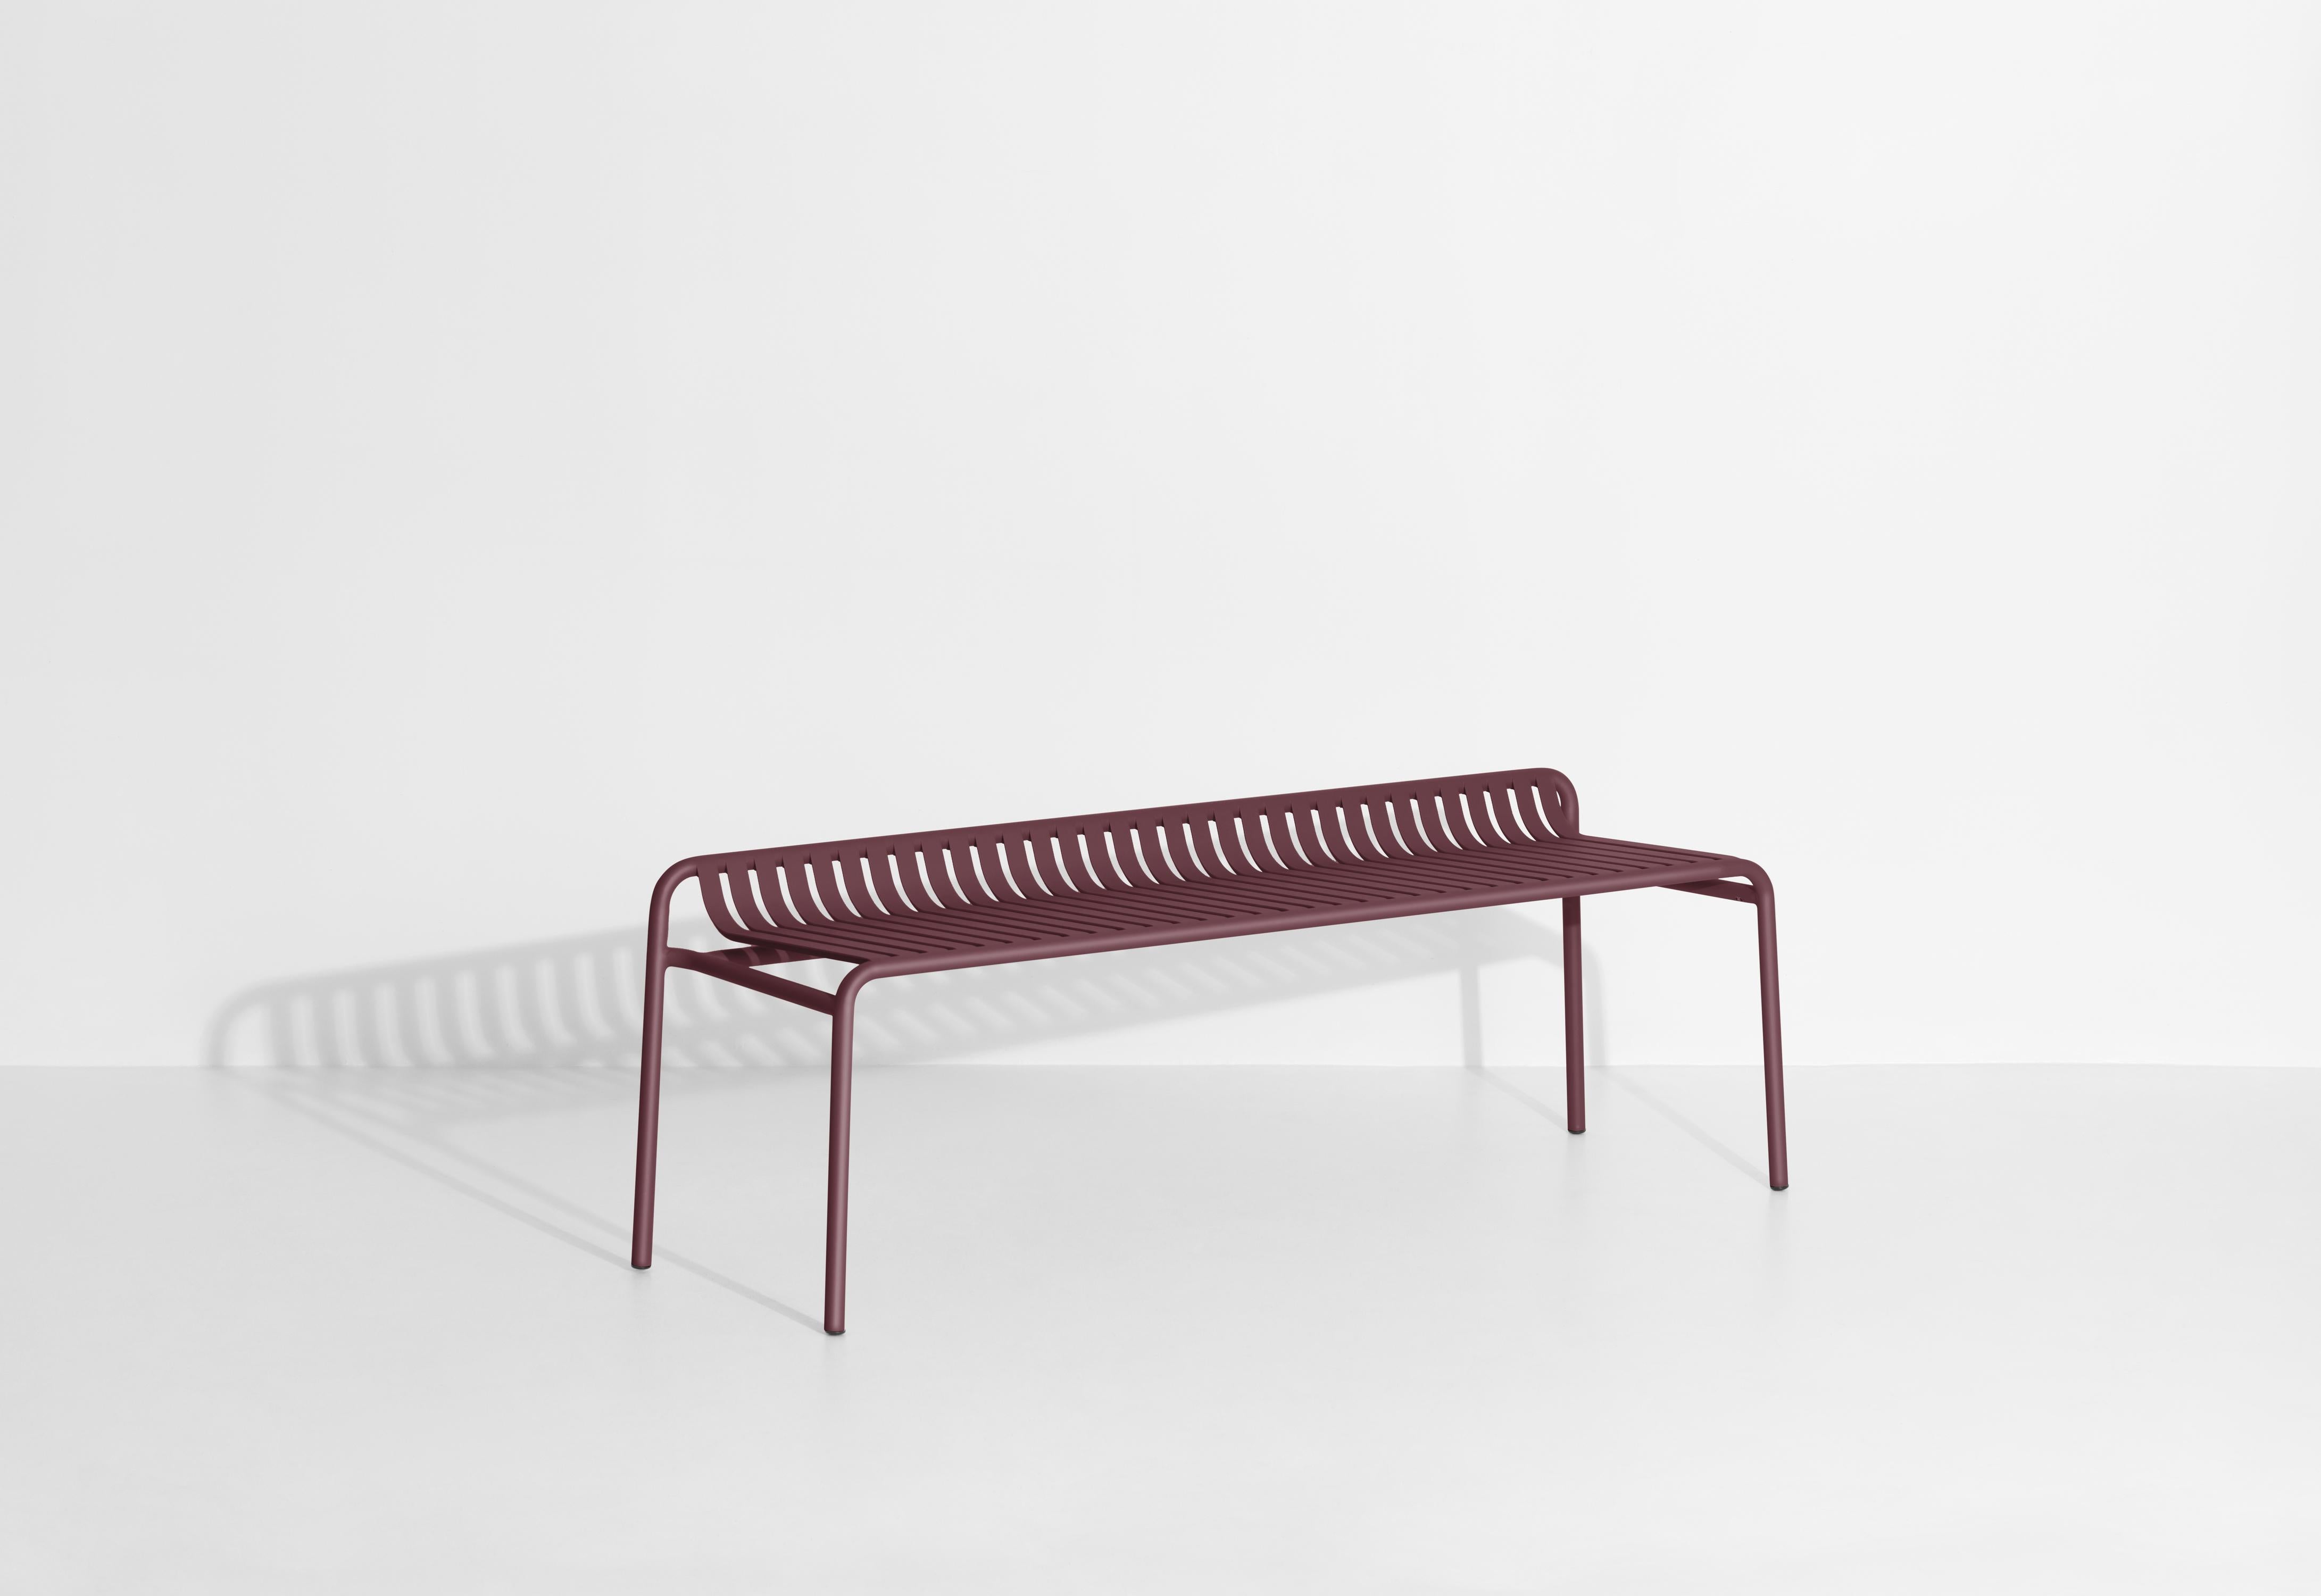 Chinese Petite Friture Week-End Bench without Back in Burgundy Aluminium, 2017  For Sale